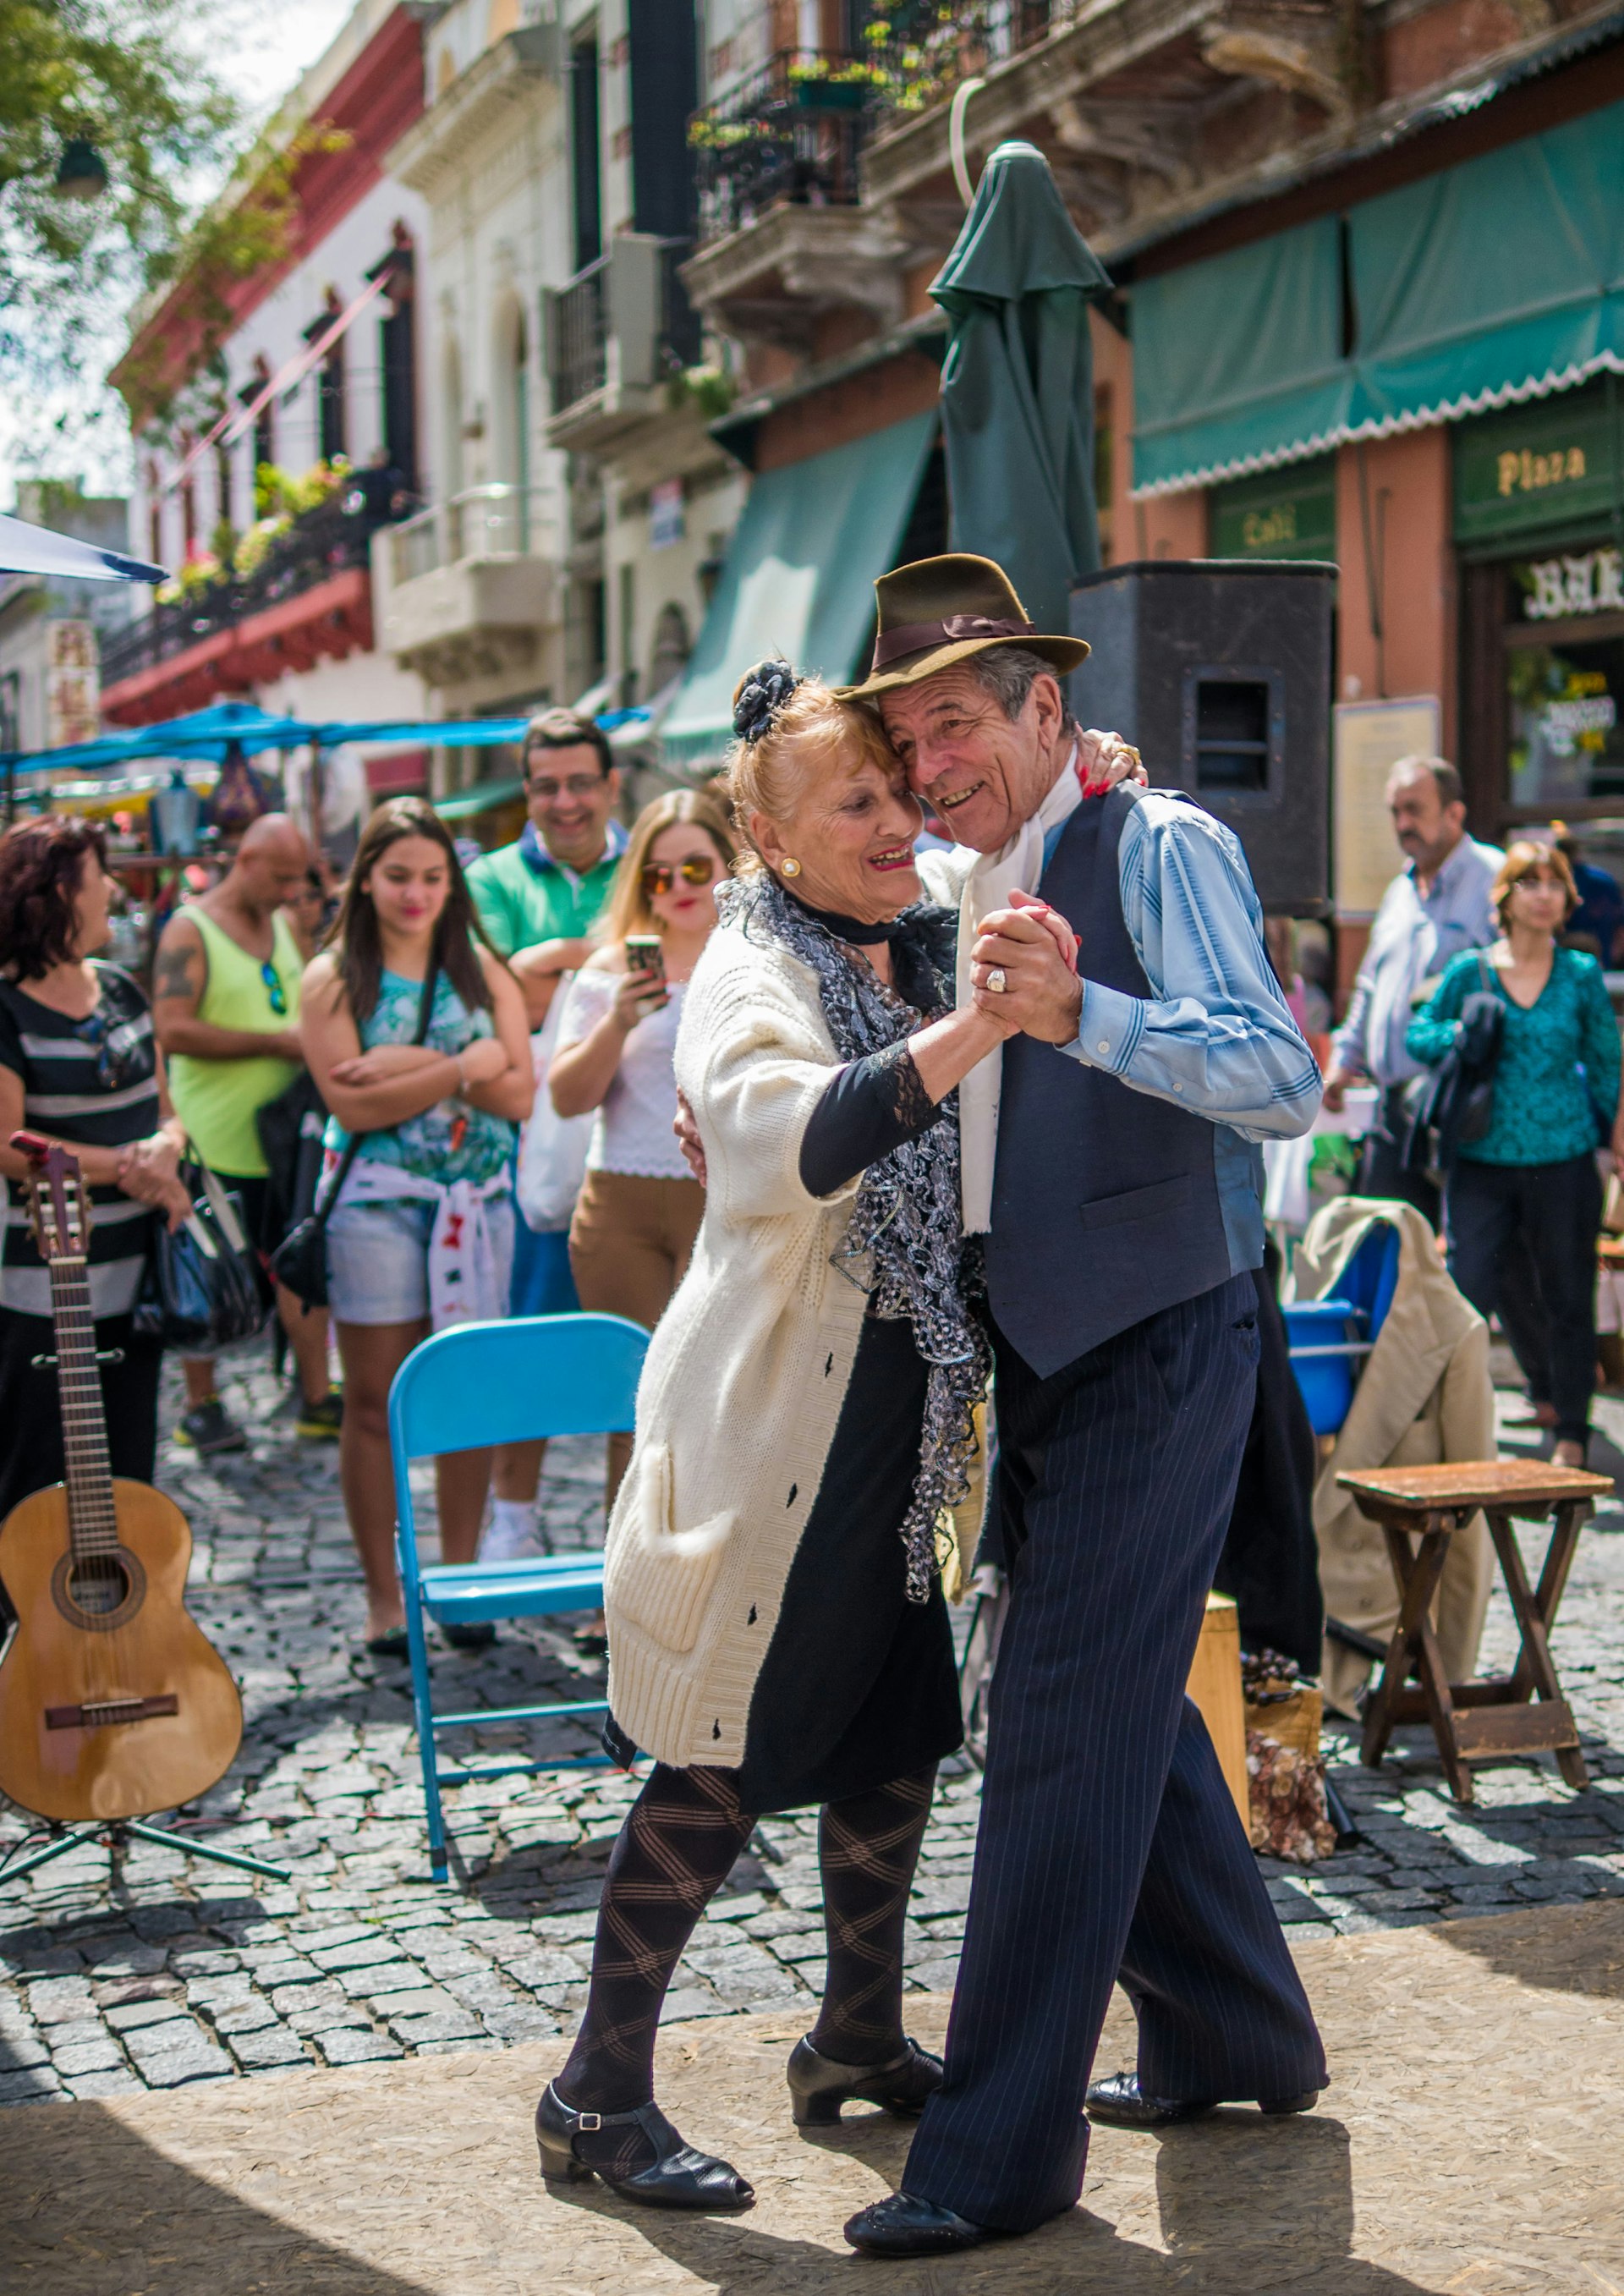 A pair of elderly tango dancers perform on a busy street with many smiling people watching on